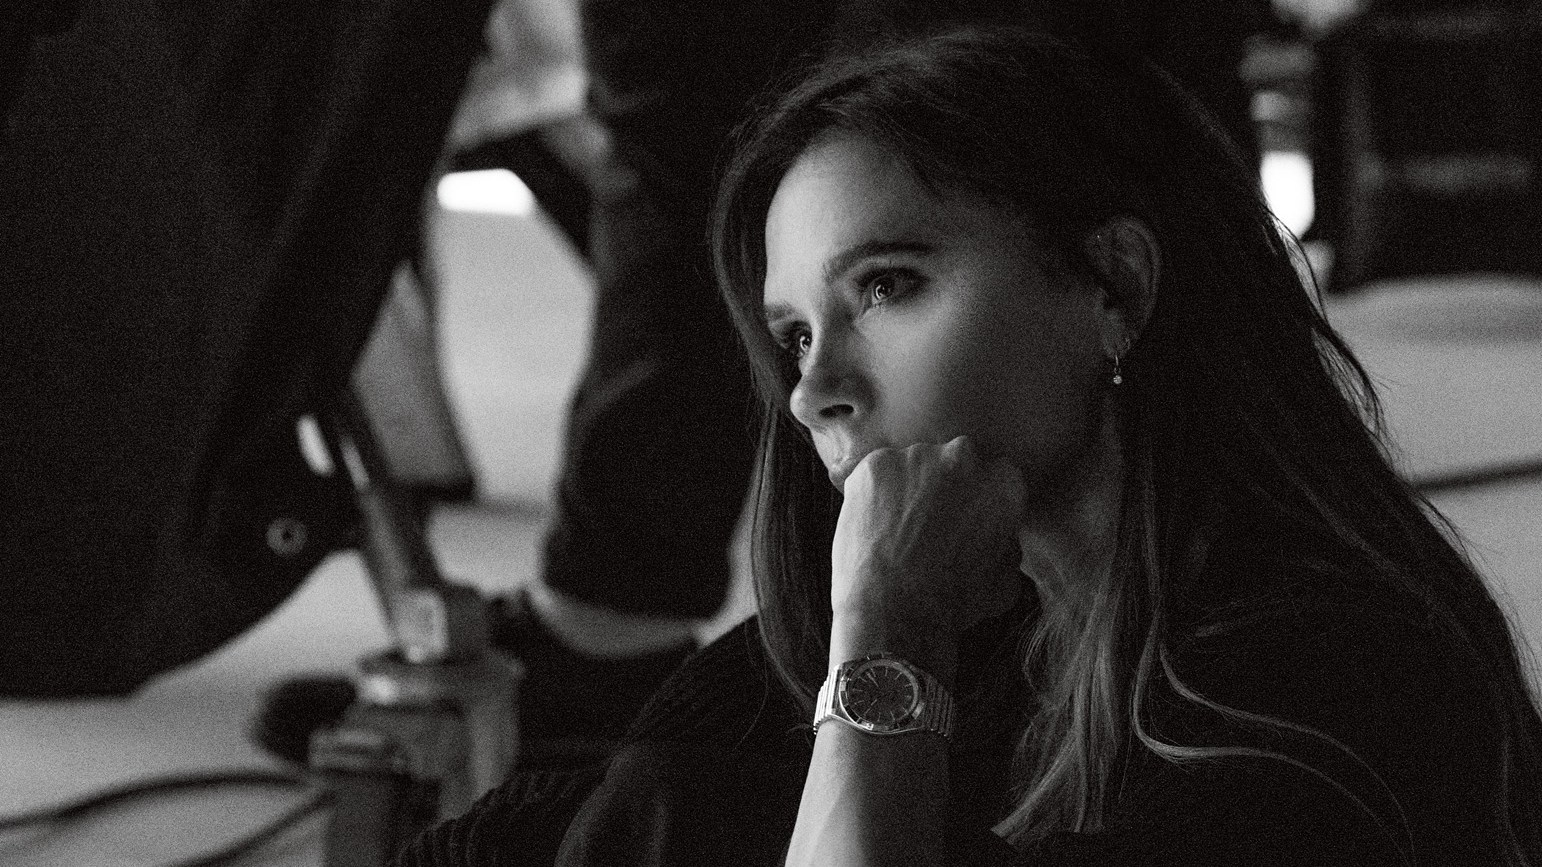 What’s the time, Victoria Beckham?